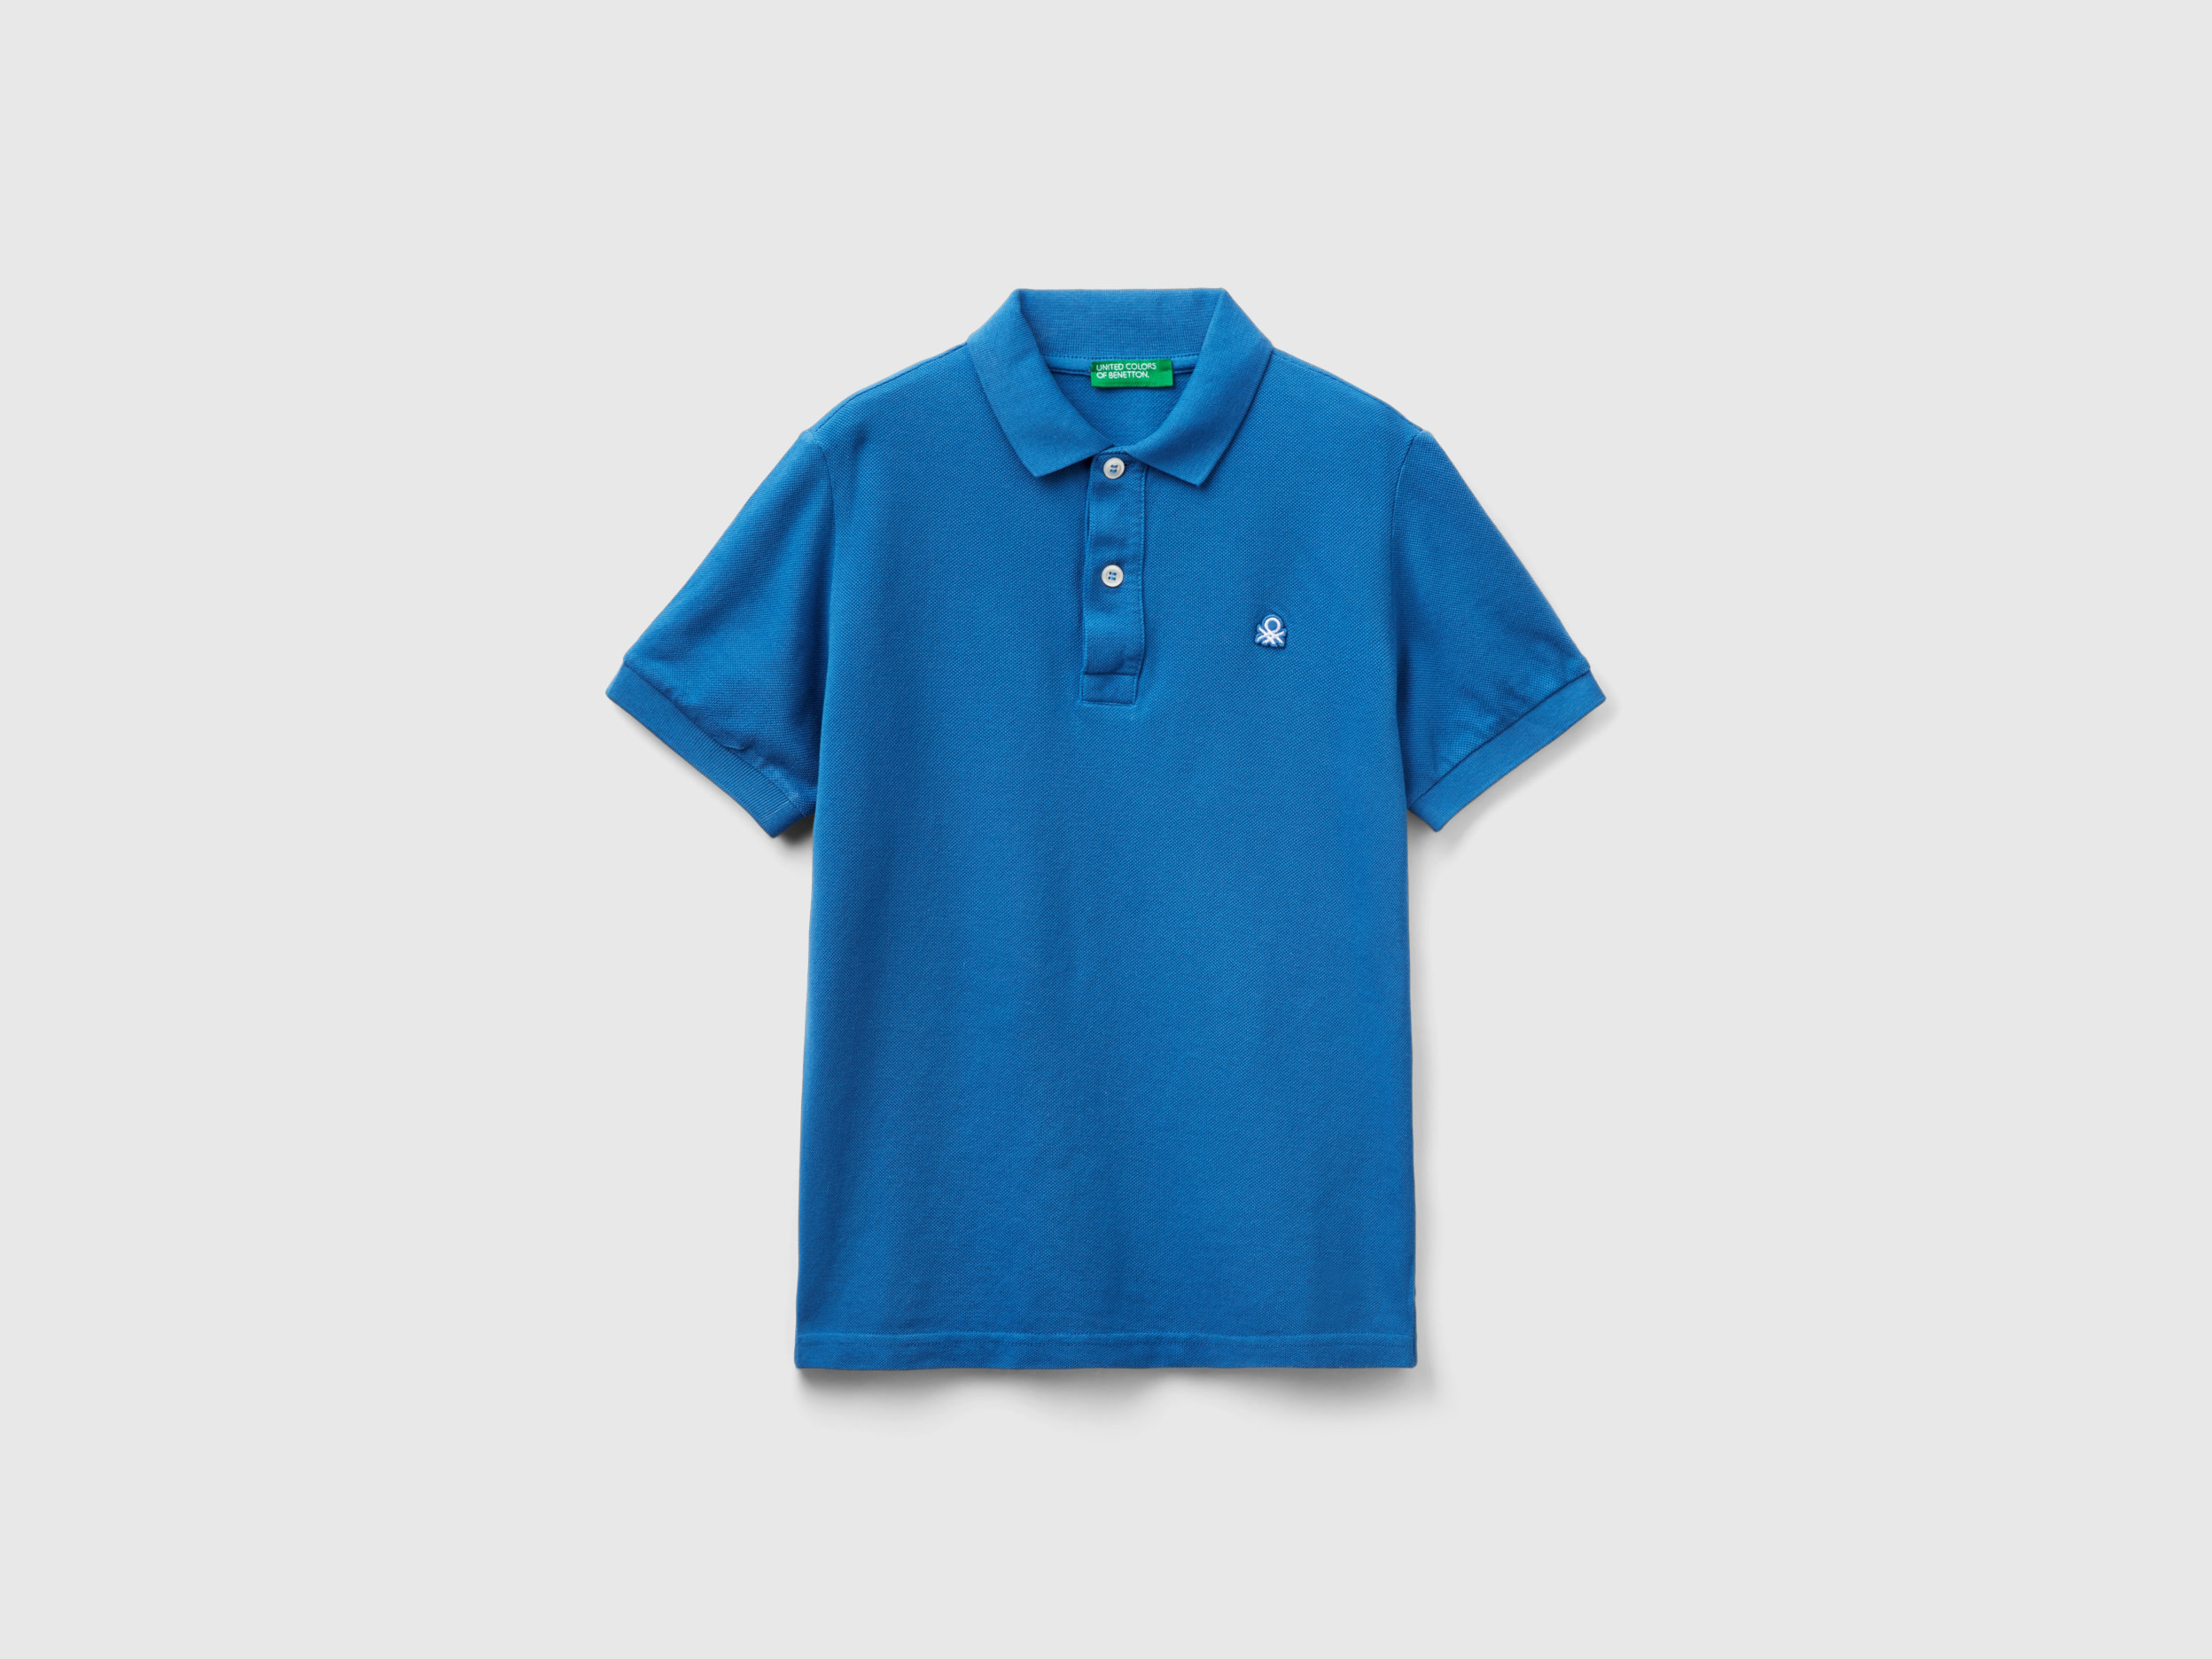 Image of Benetton, Slim Fit Polo In 100% Organic Cotton, size M, Blue, Kids